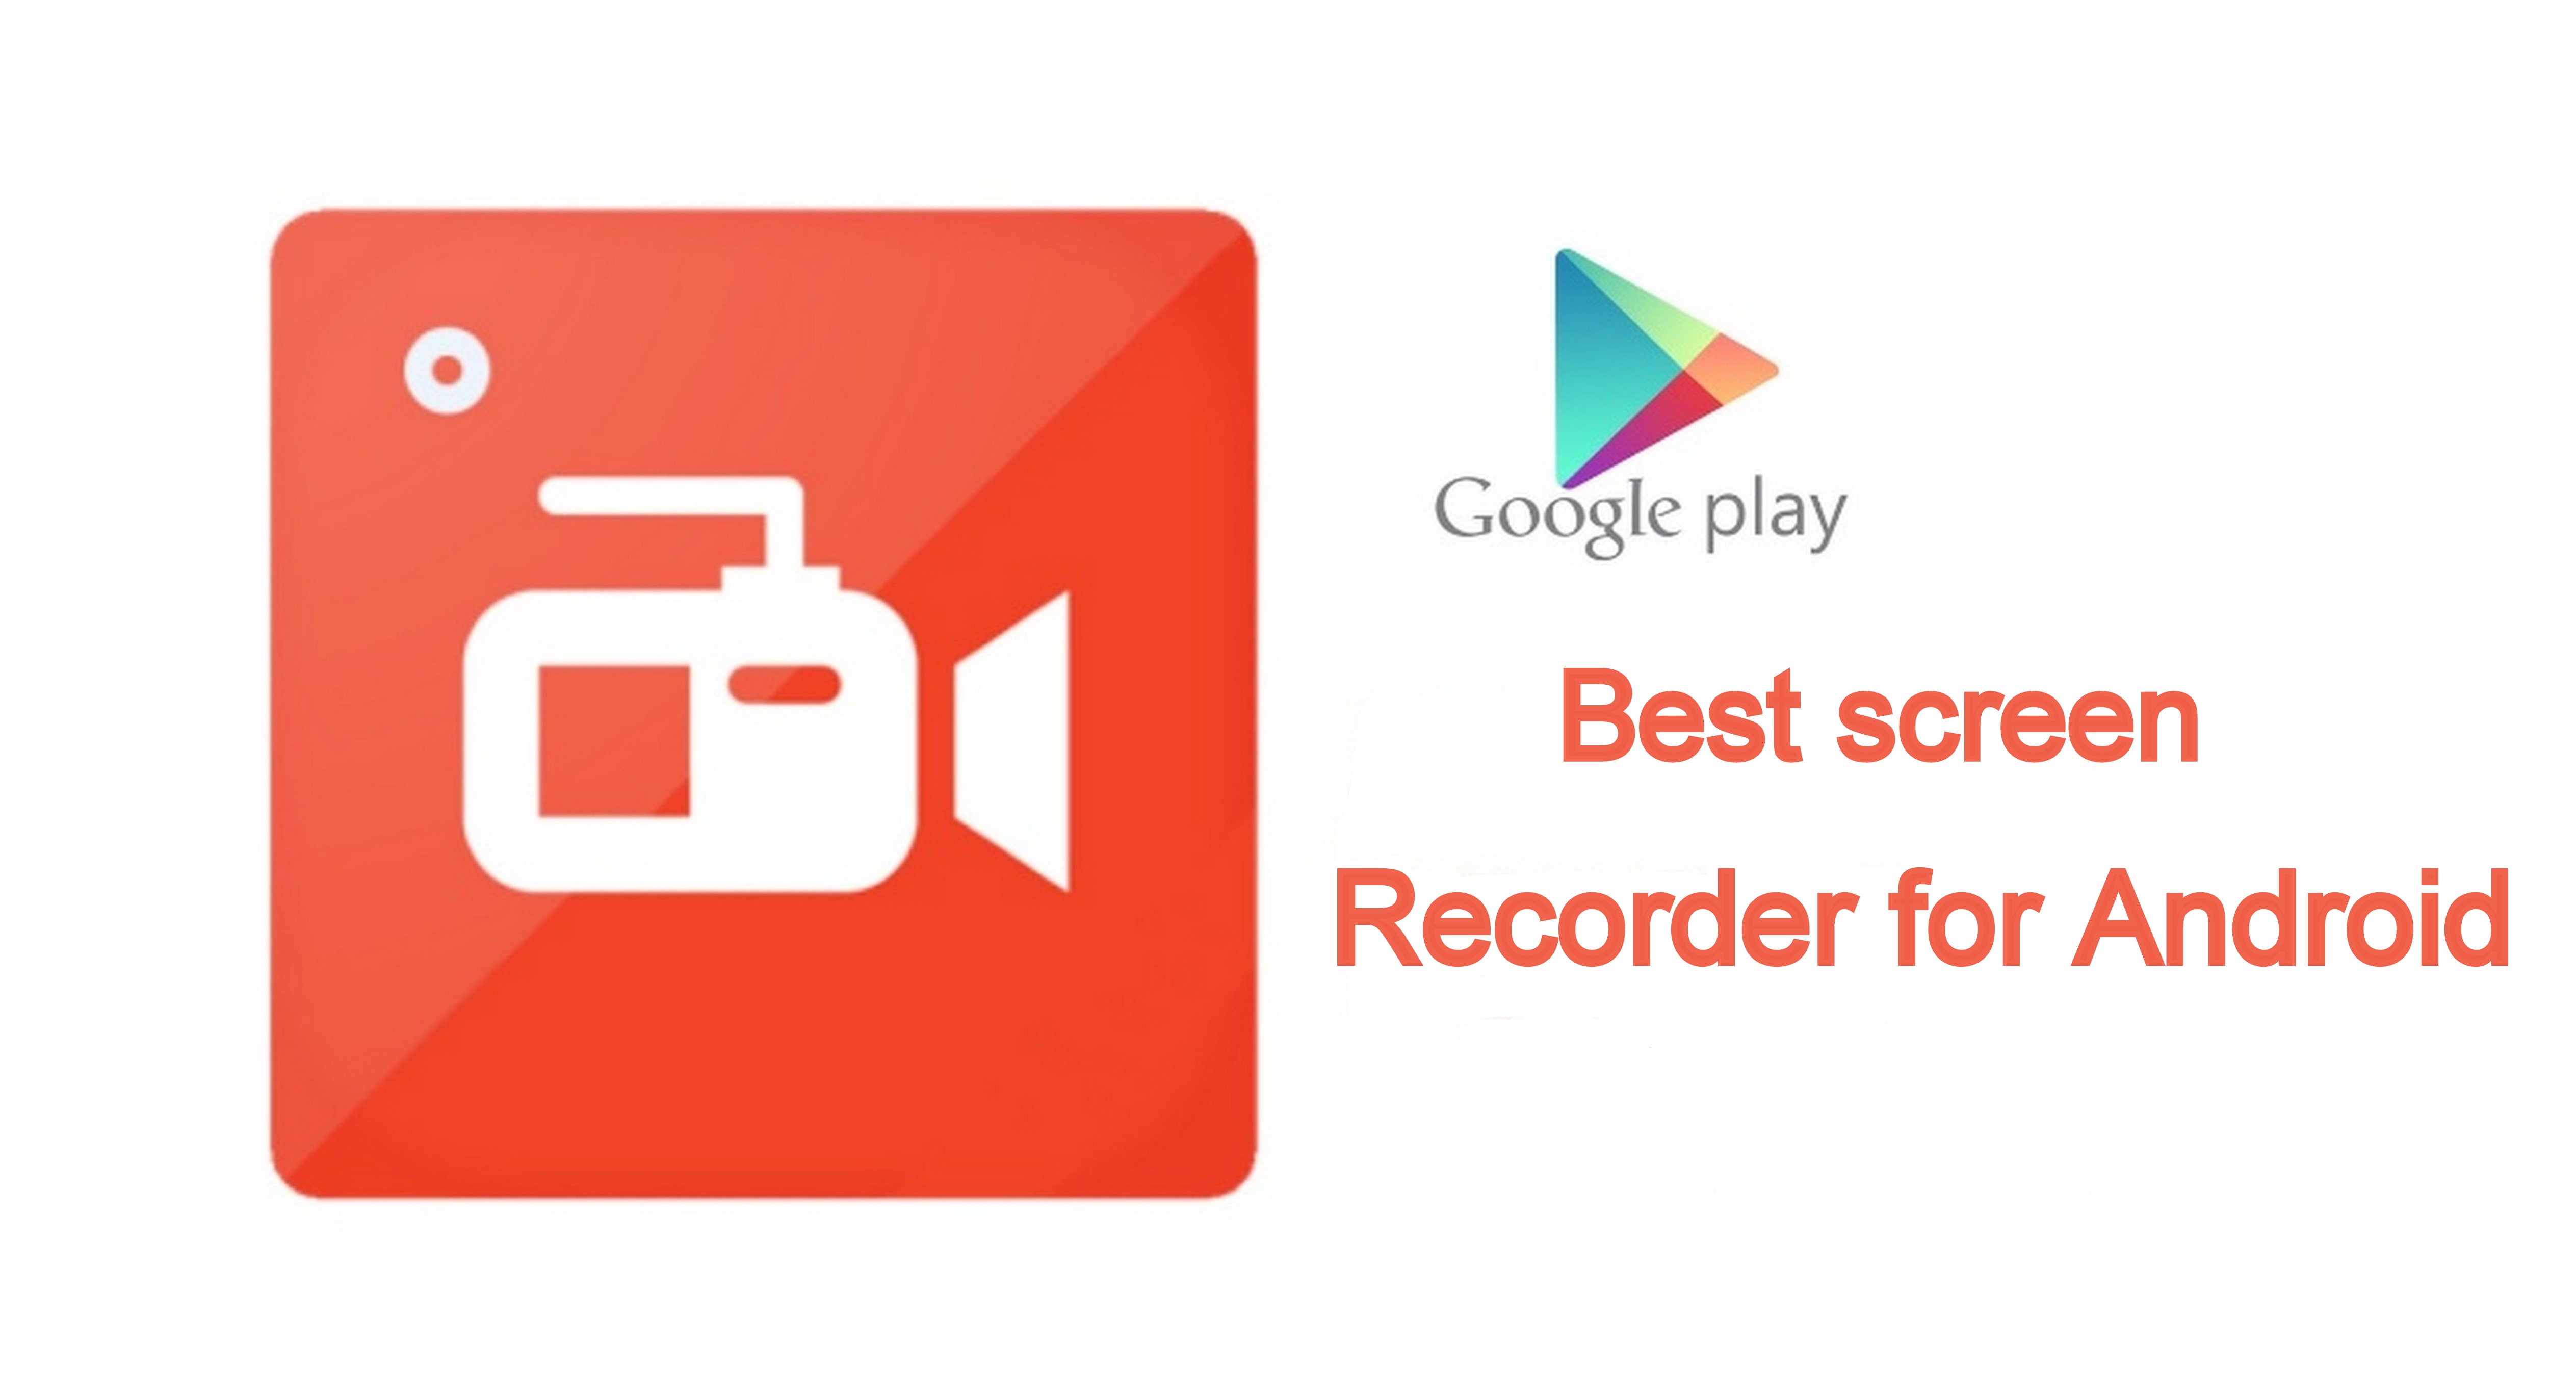 5 Best screen recorder for android Phones